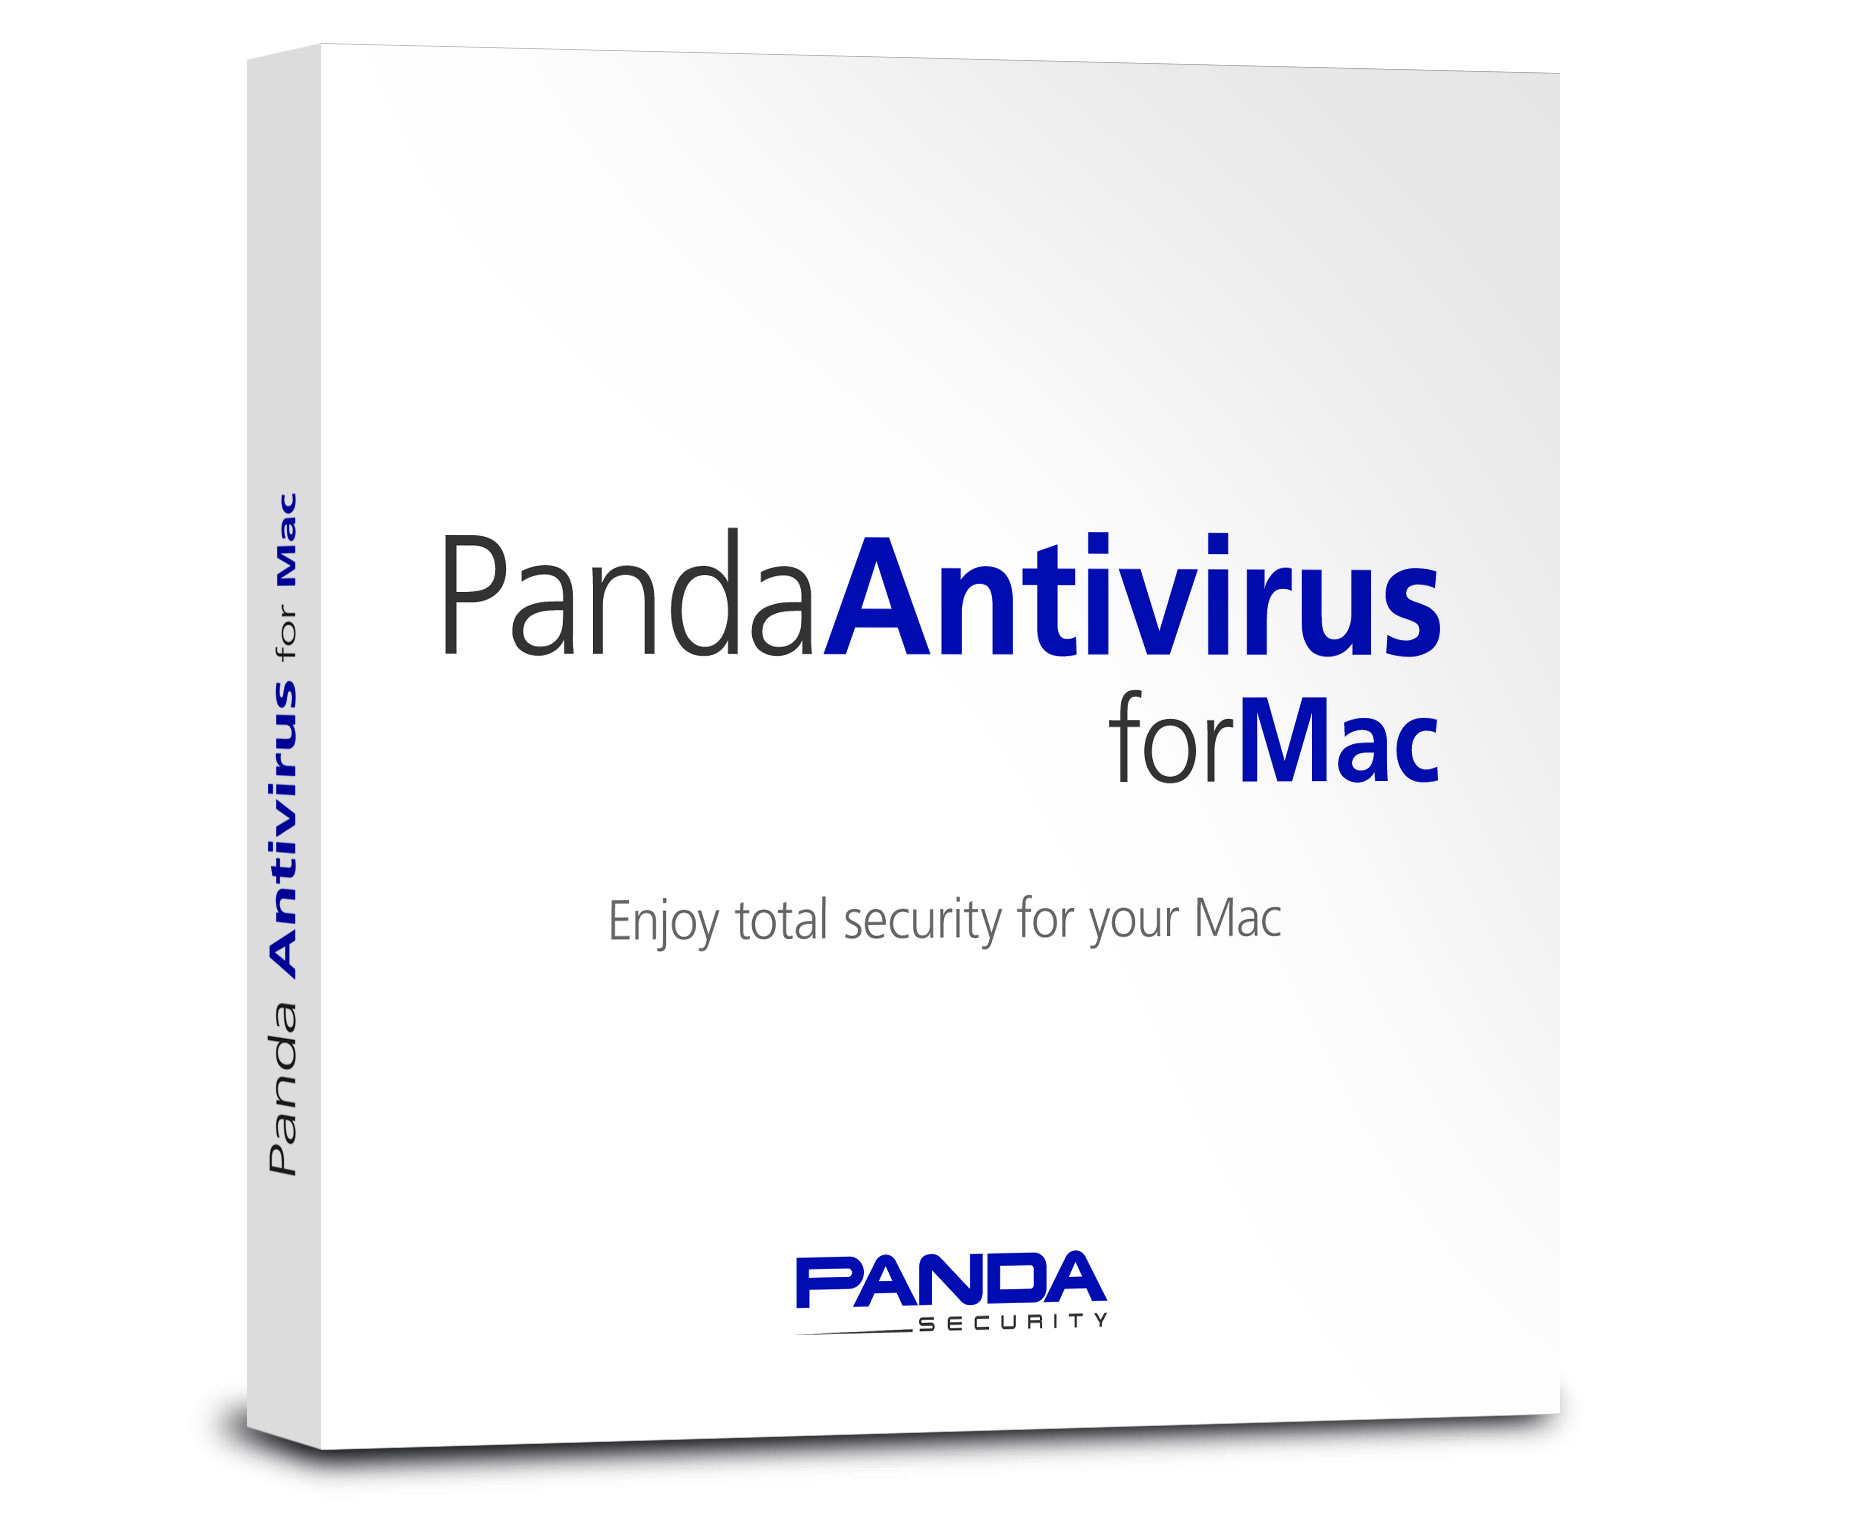 total antivirus protection for your mac